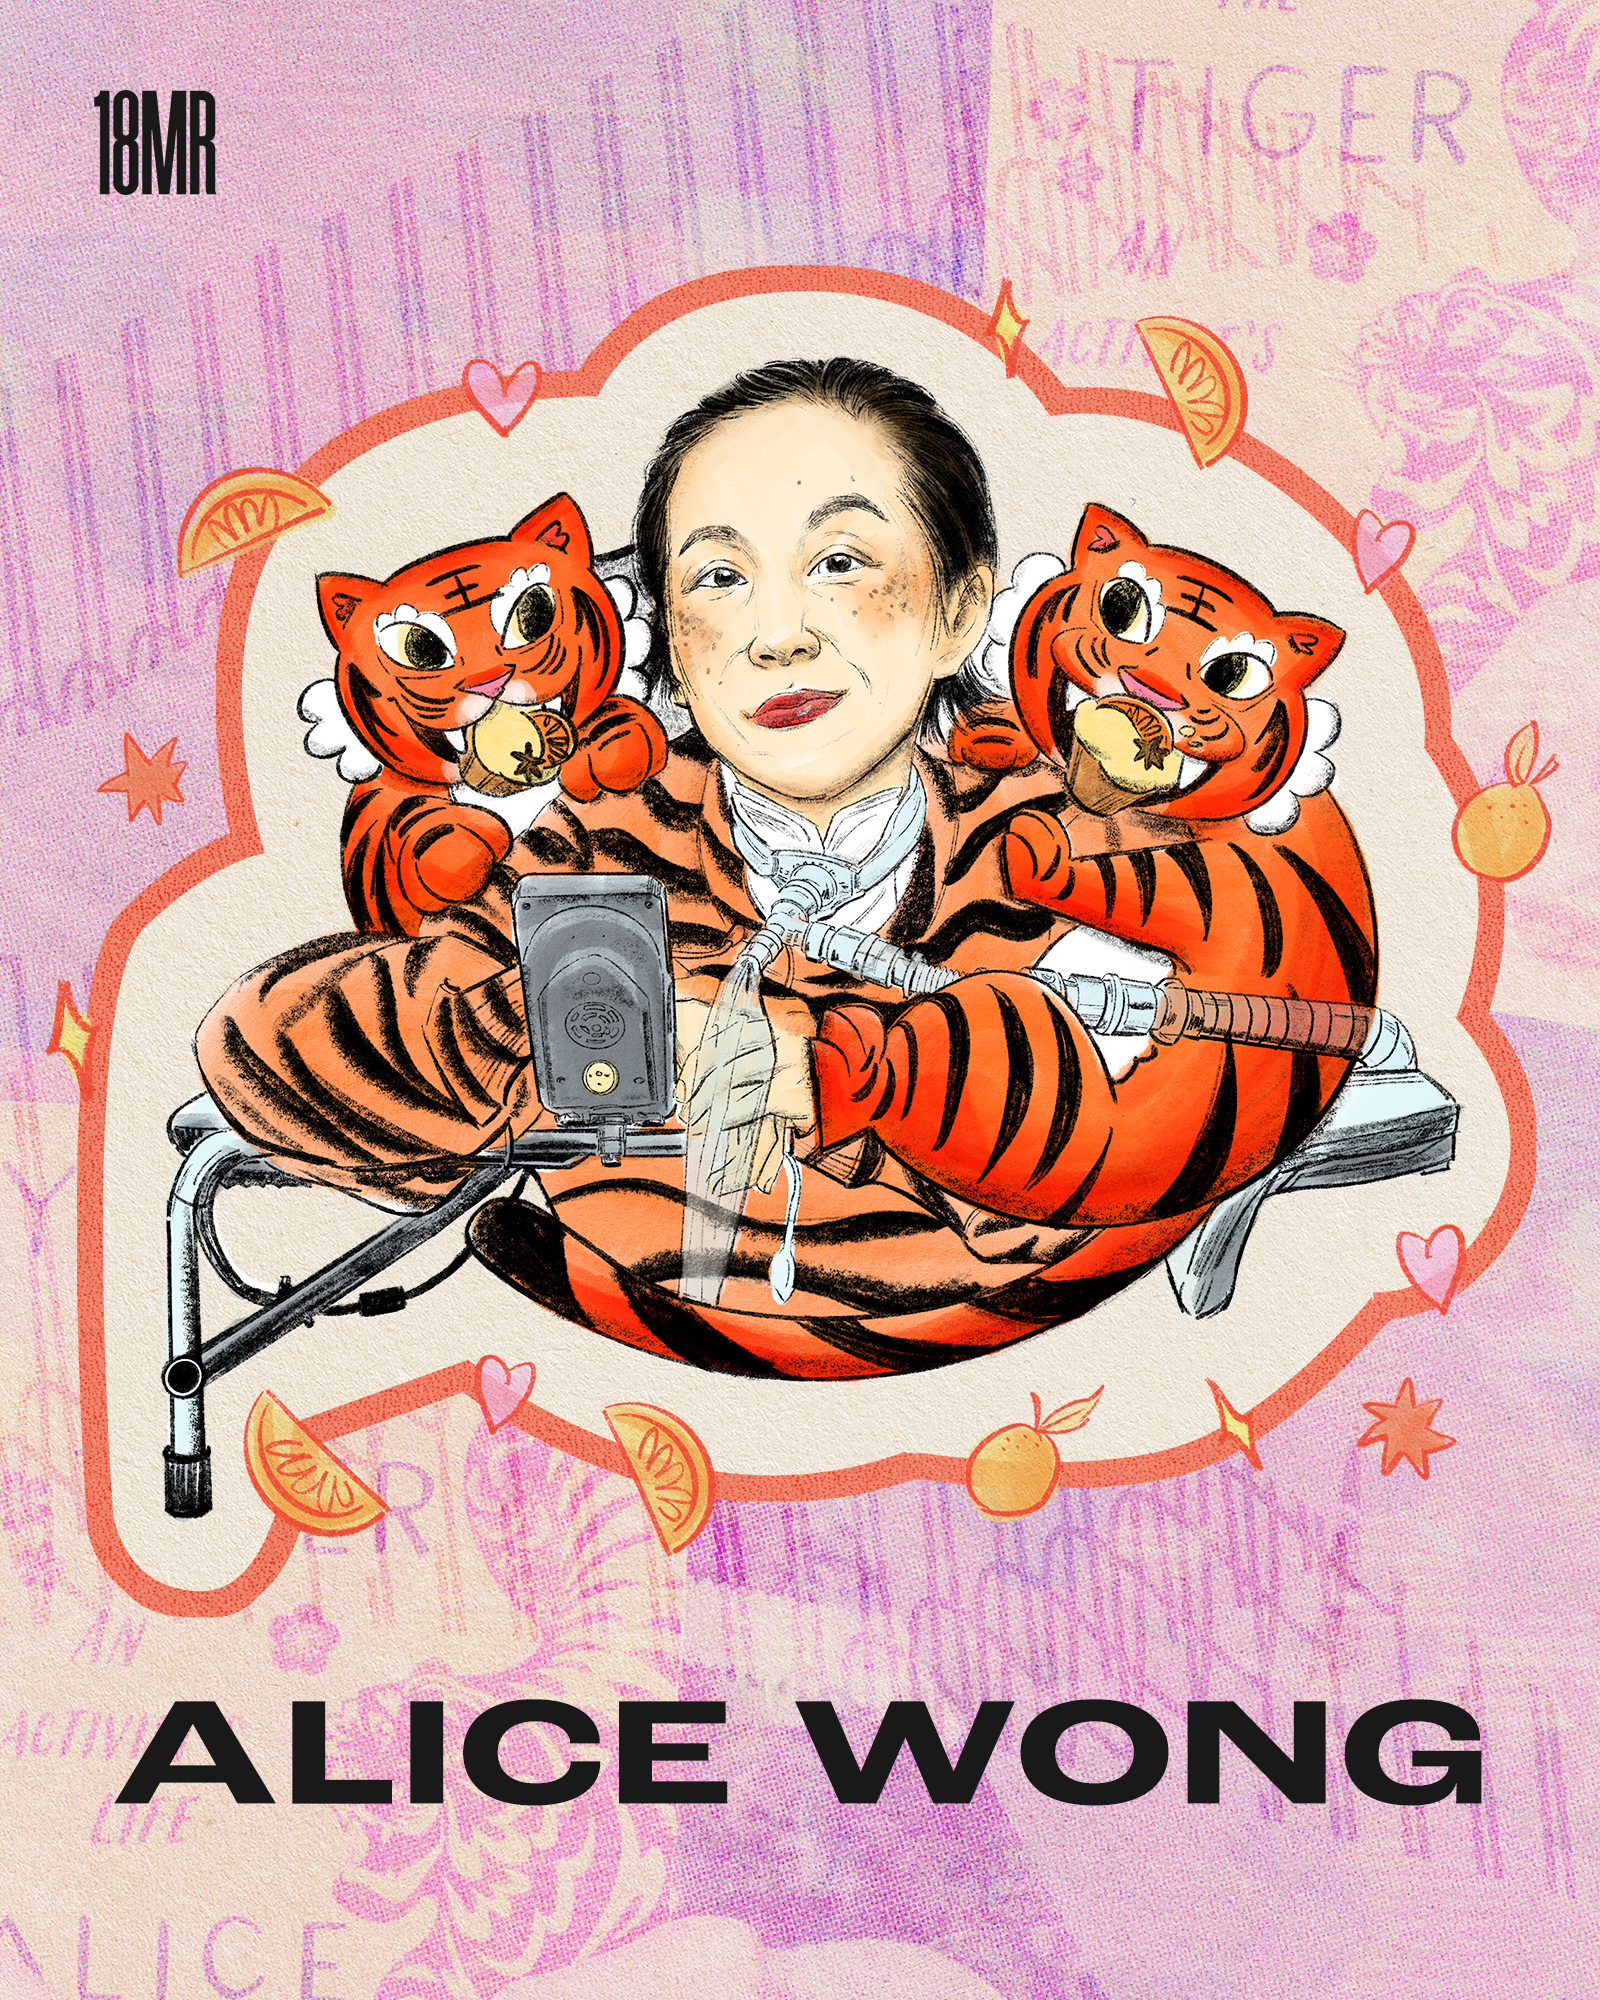 Illustration of Alice Wong, a Chinese American woman with a soft smile, red lipstick and short hair. She has a ventilator tube attached to a tracheostomy. She has She has two tigers on each side of her shoulder eating orange five spice Mochi muffins. Pink background with a faint collage of her book “Year of the Tiger” Text at the bottom “Alice Wong”